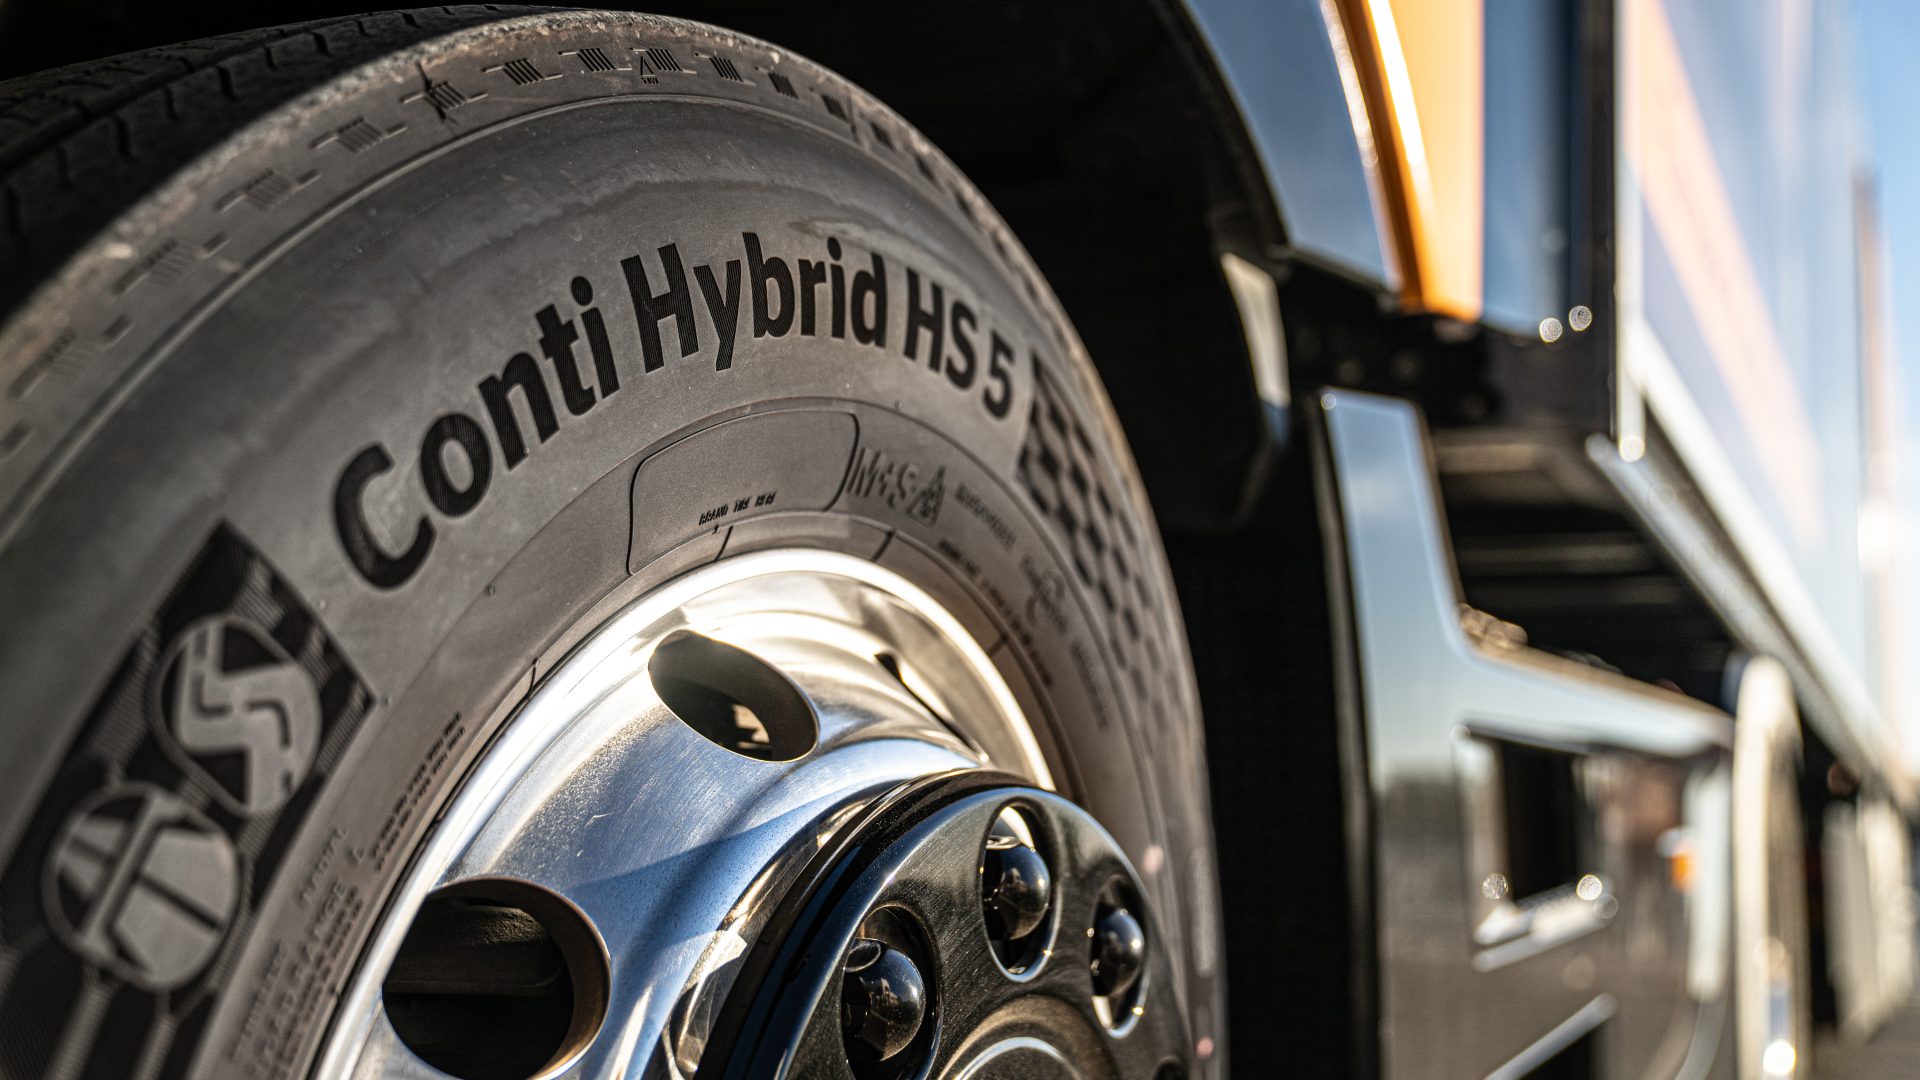 Continental launches new tire ranges for trucks and vans, with an eye on e-mobility